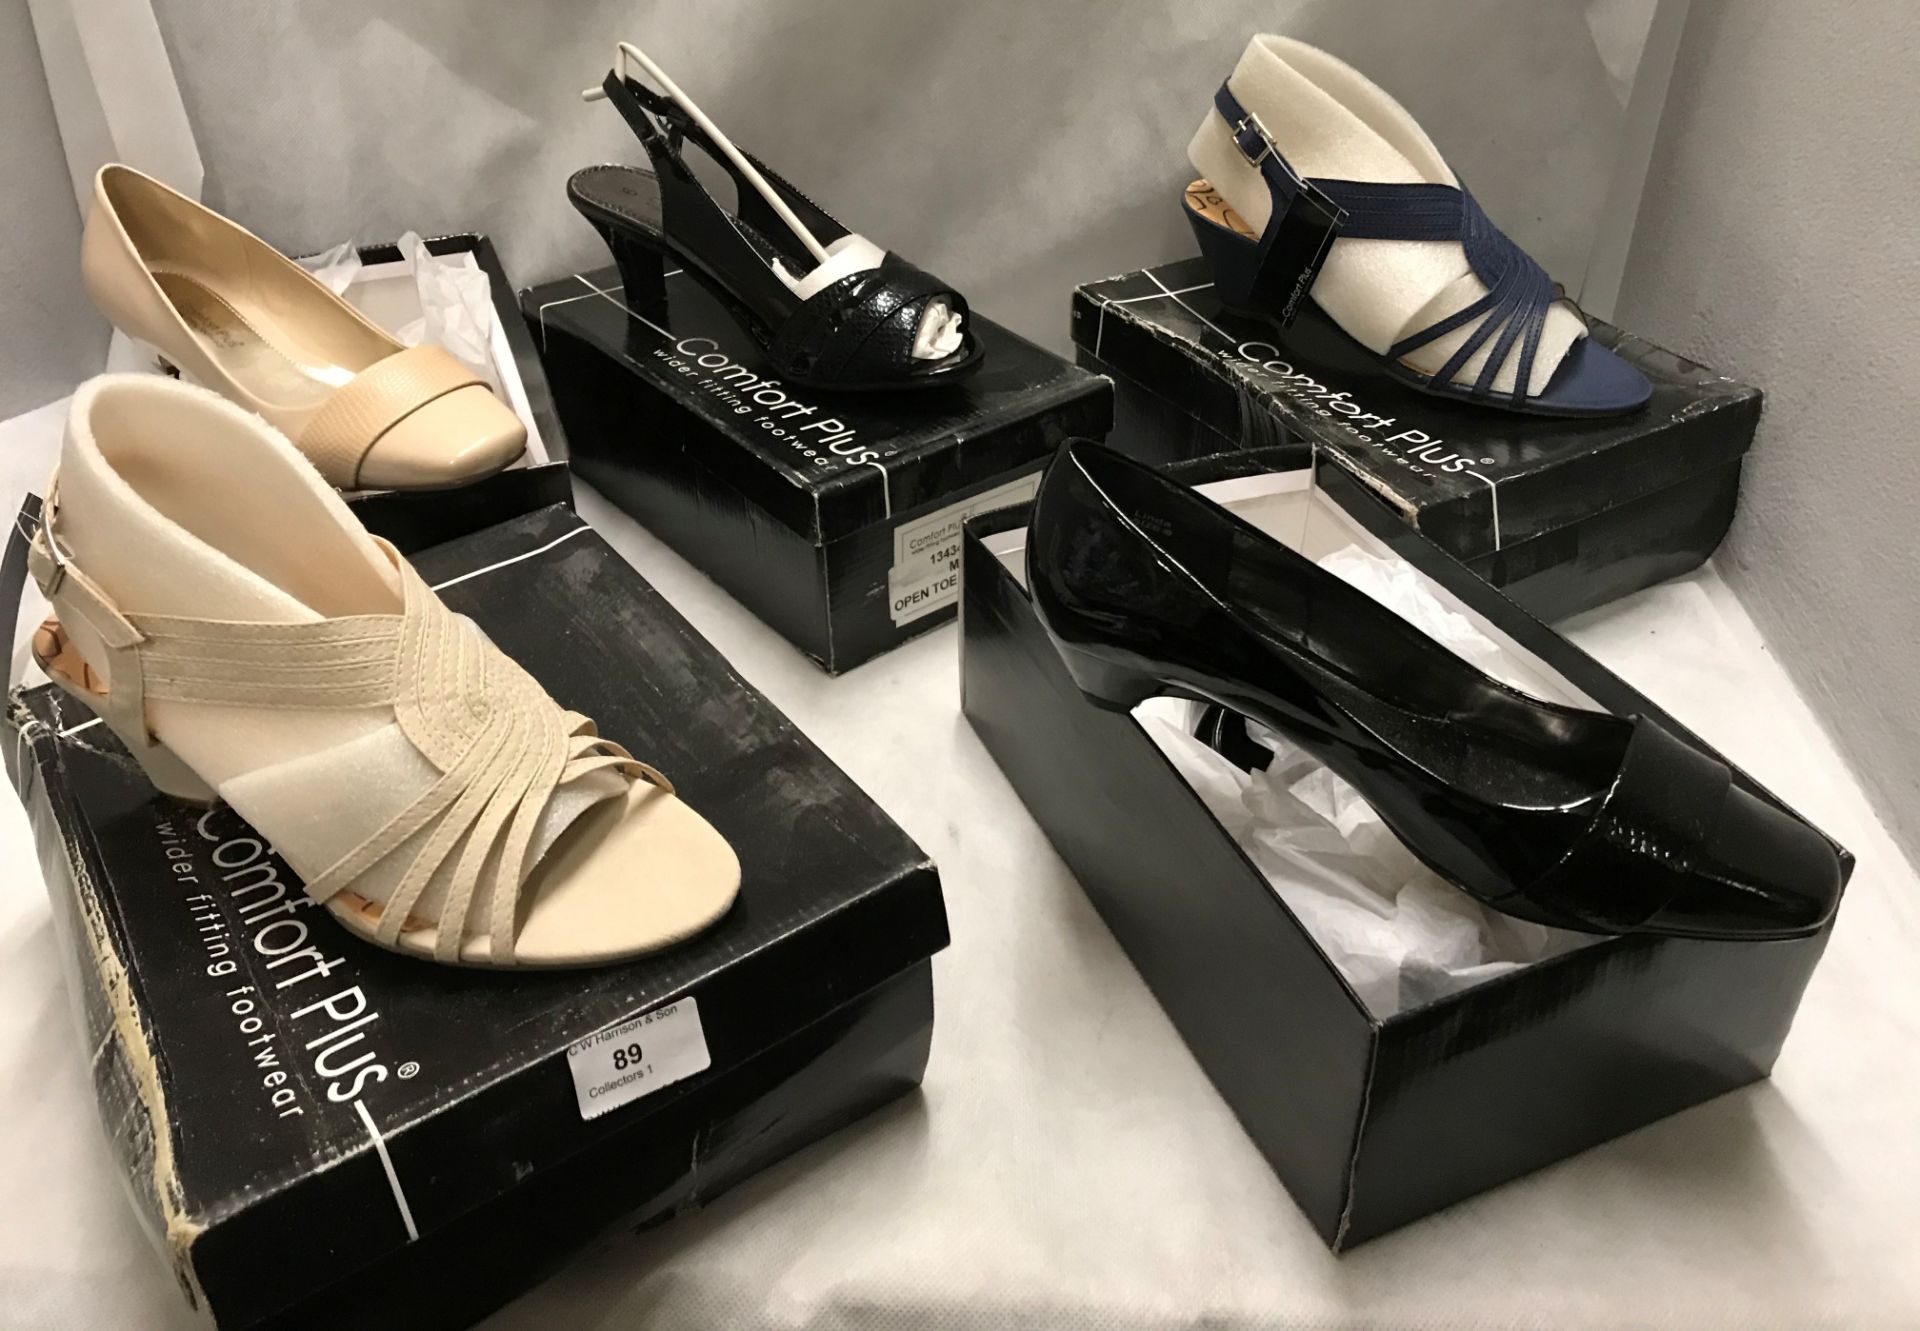 5 x pairs of ladies heeled shoes by Comfort Plus (size 6)